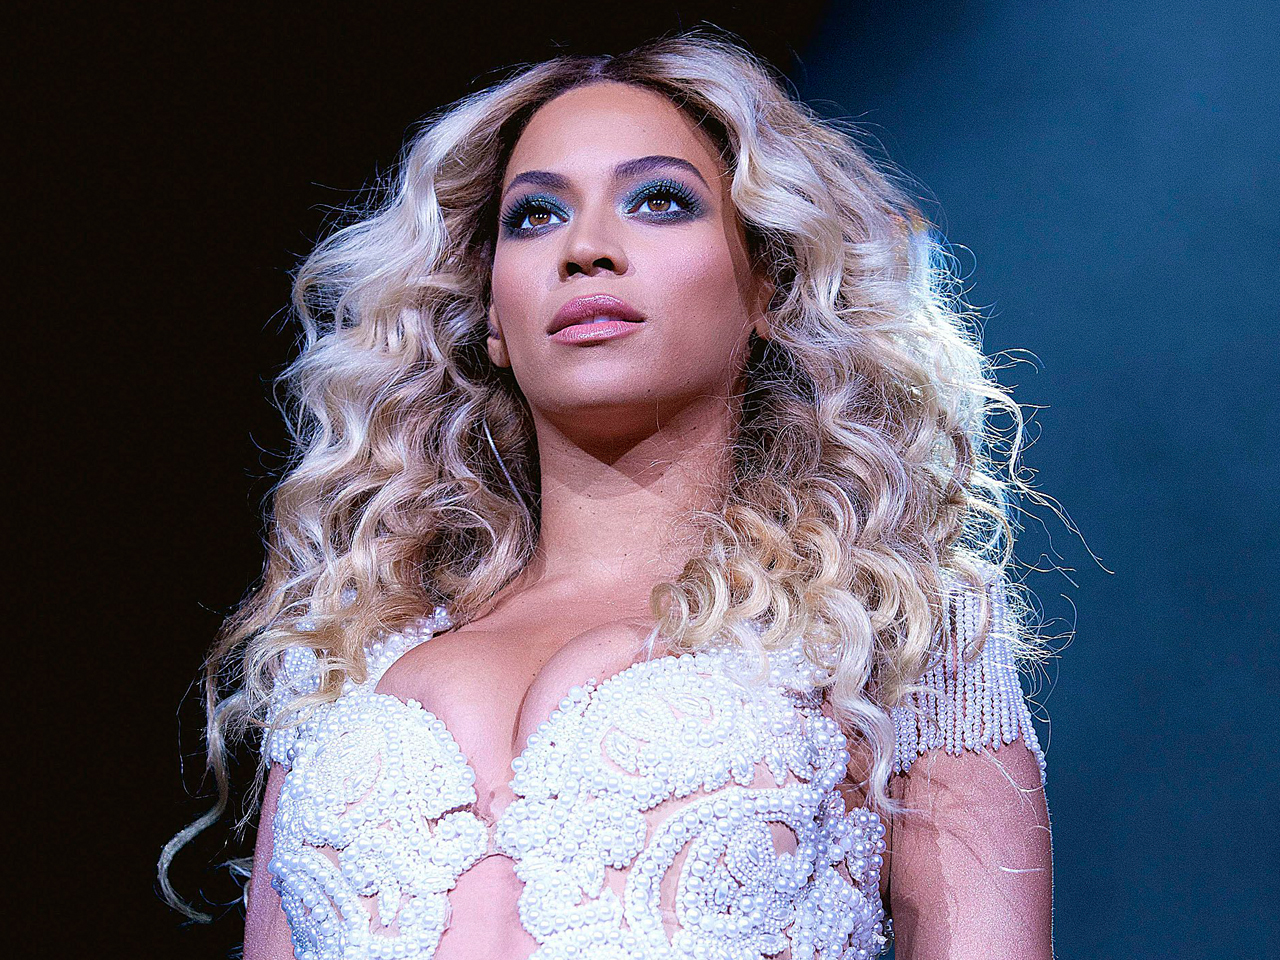 Beyonce criticized for sampling audio from shuttle Challenger disaster - TODAY.com